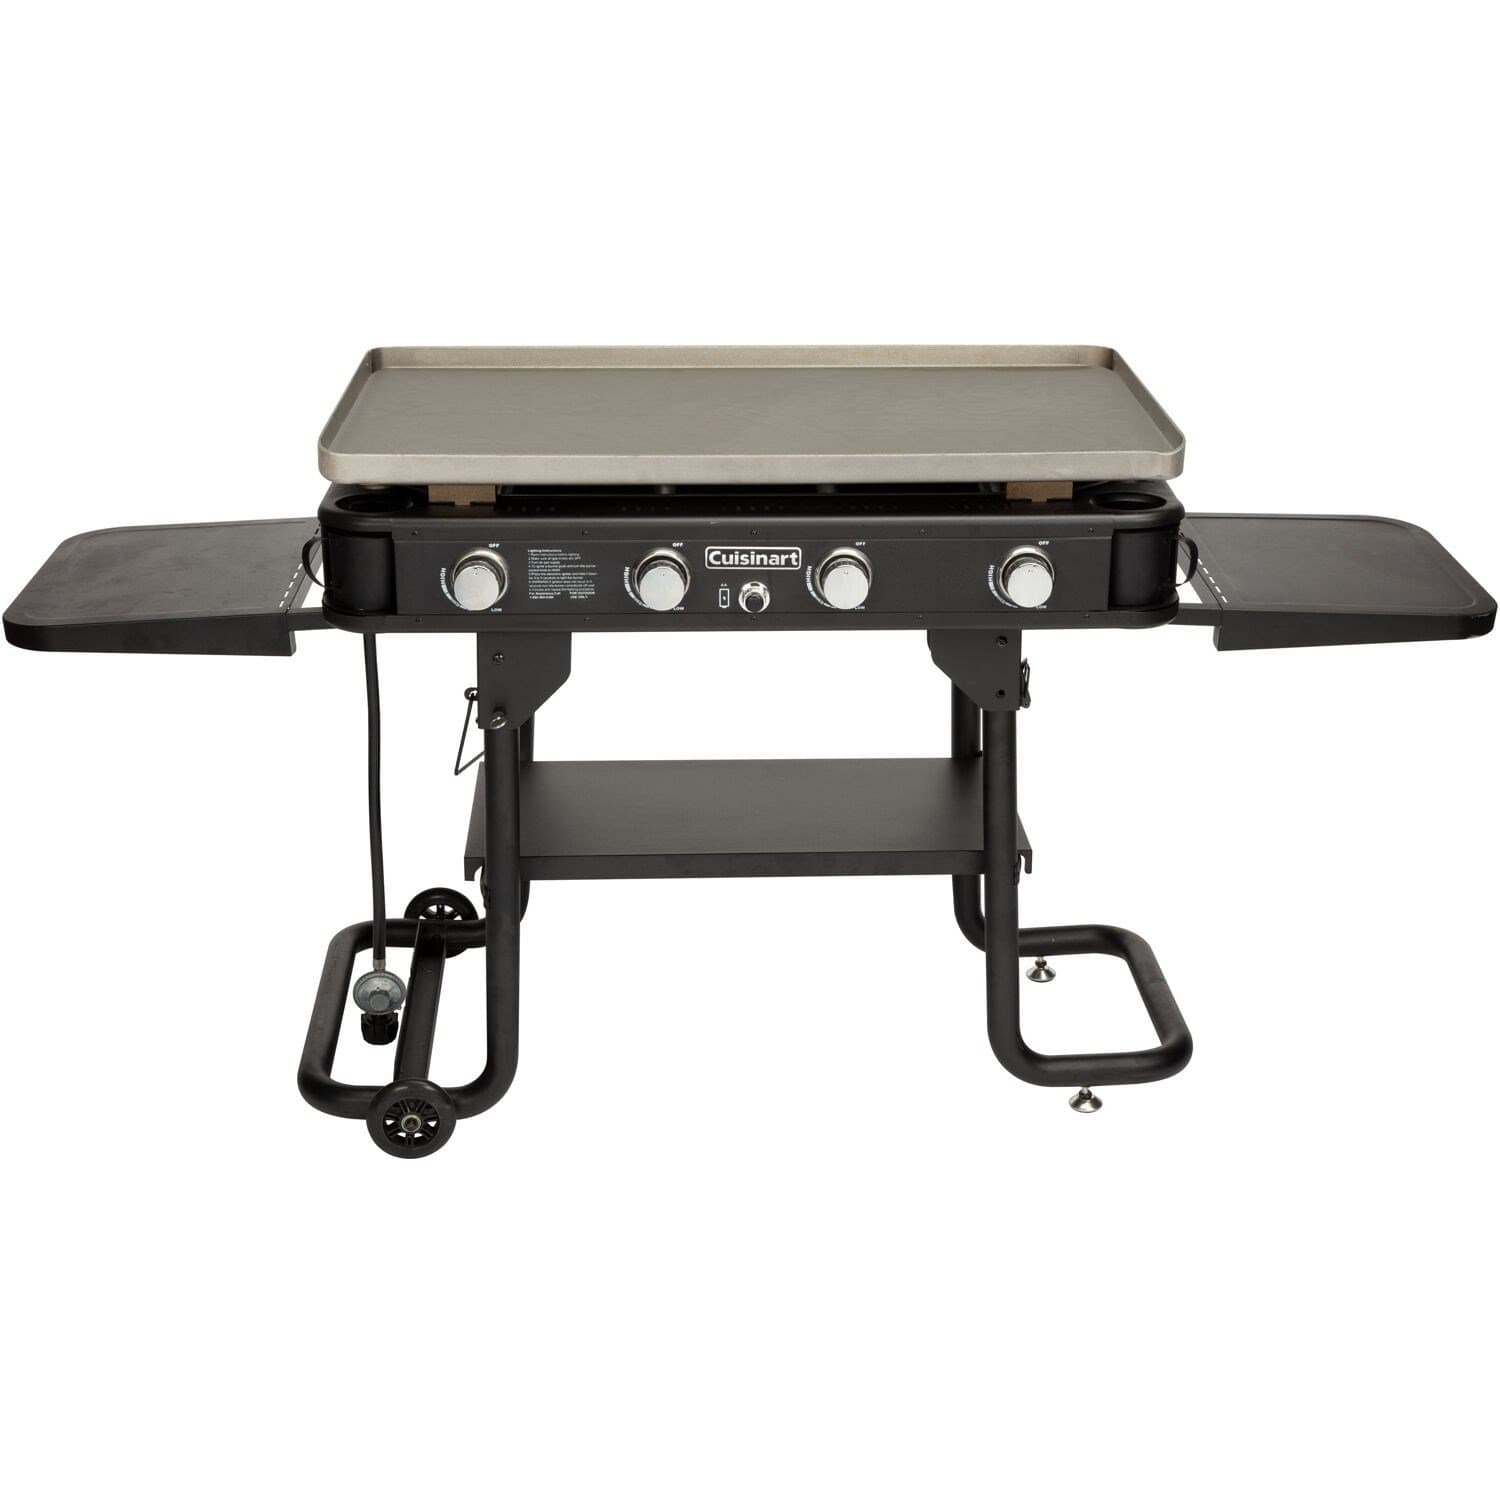 Cuisinart Gas Griddles Cuisinart  - 36" 4 Burner Gas Griddle, 760 sq inches, Removeable Side Tables - Black